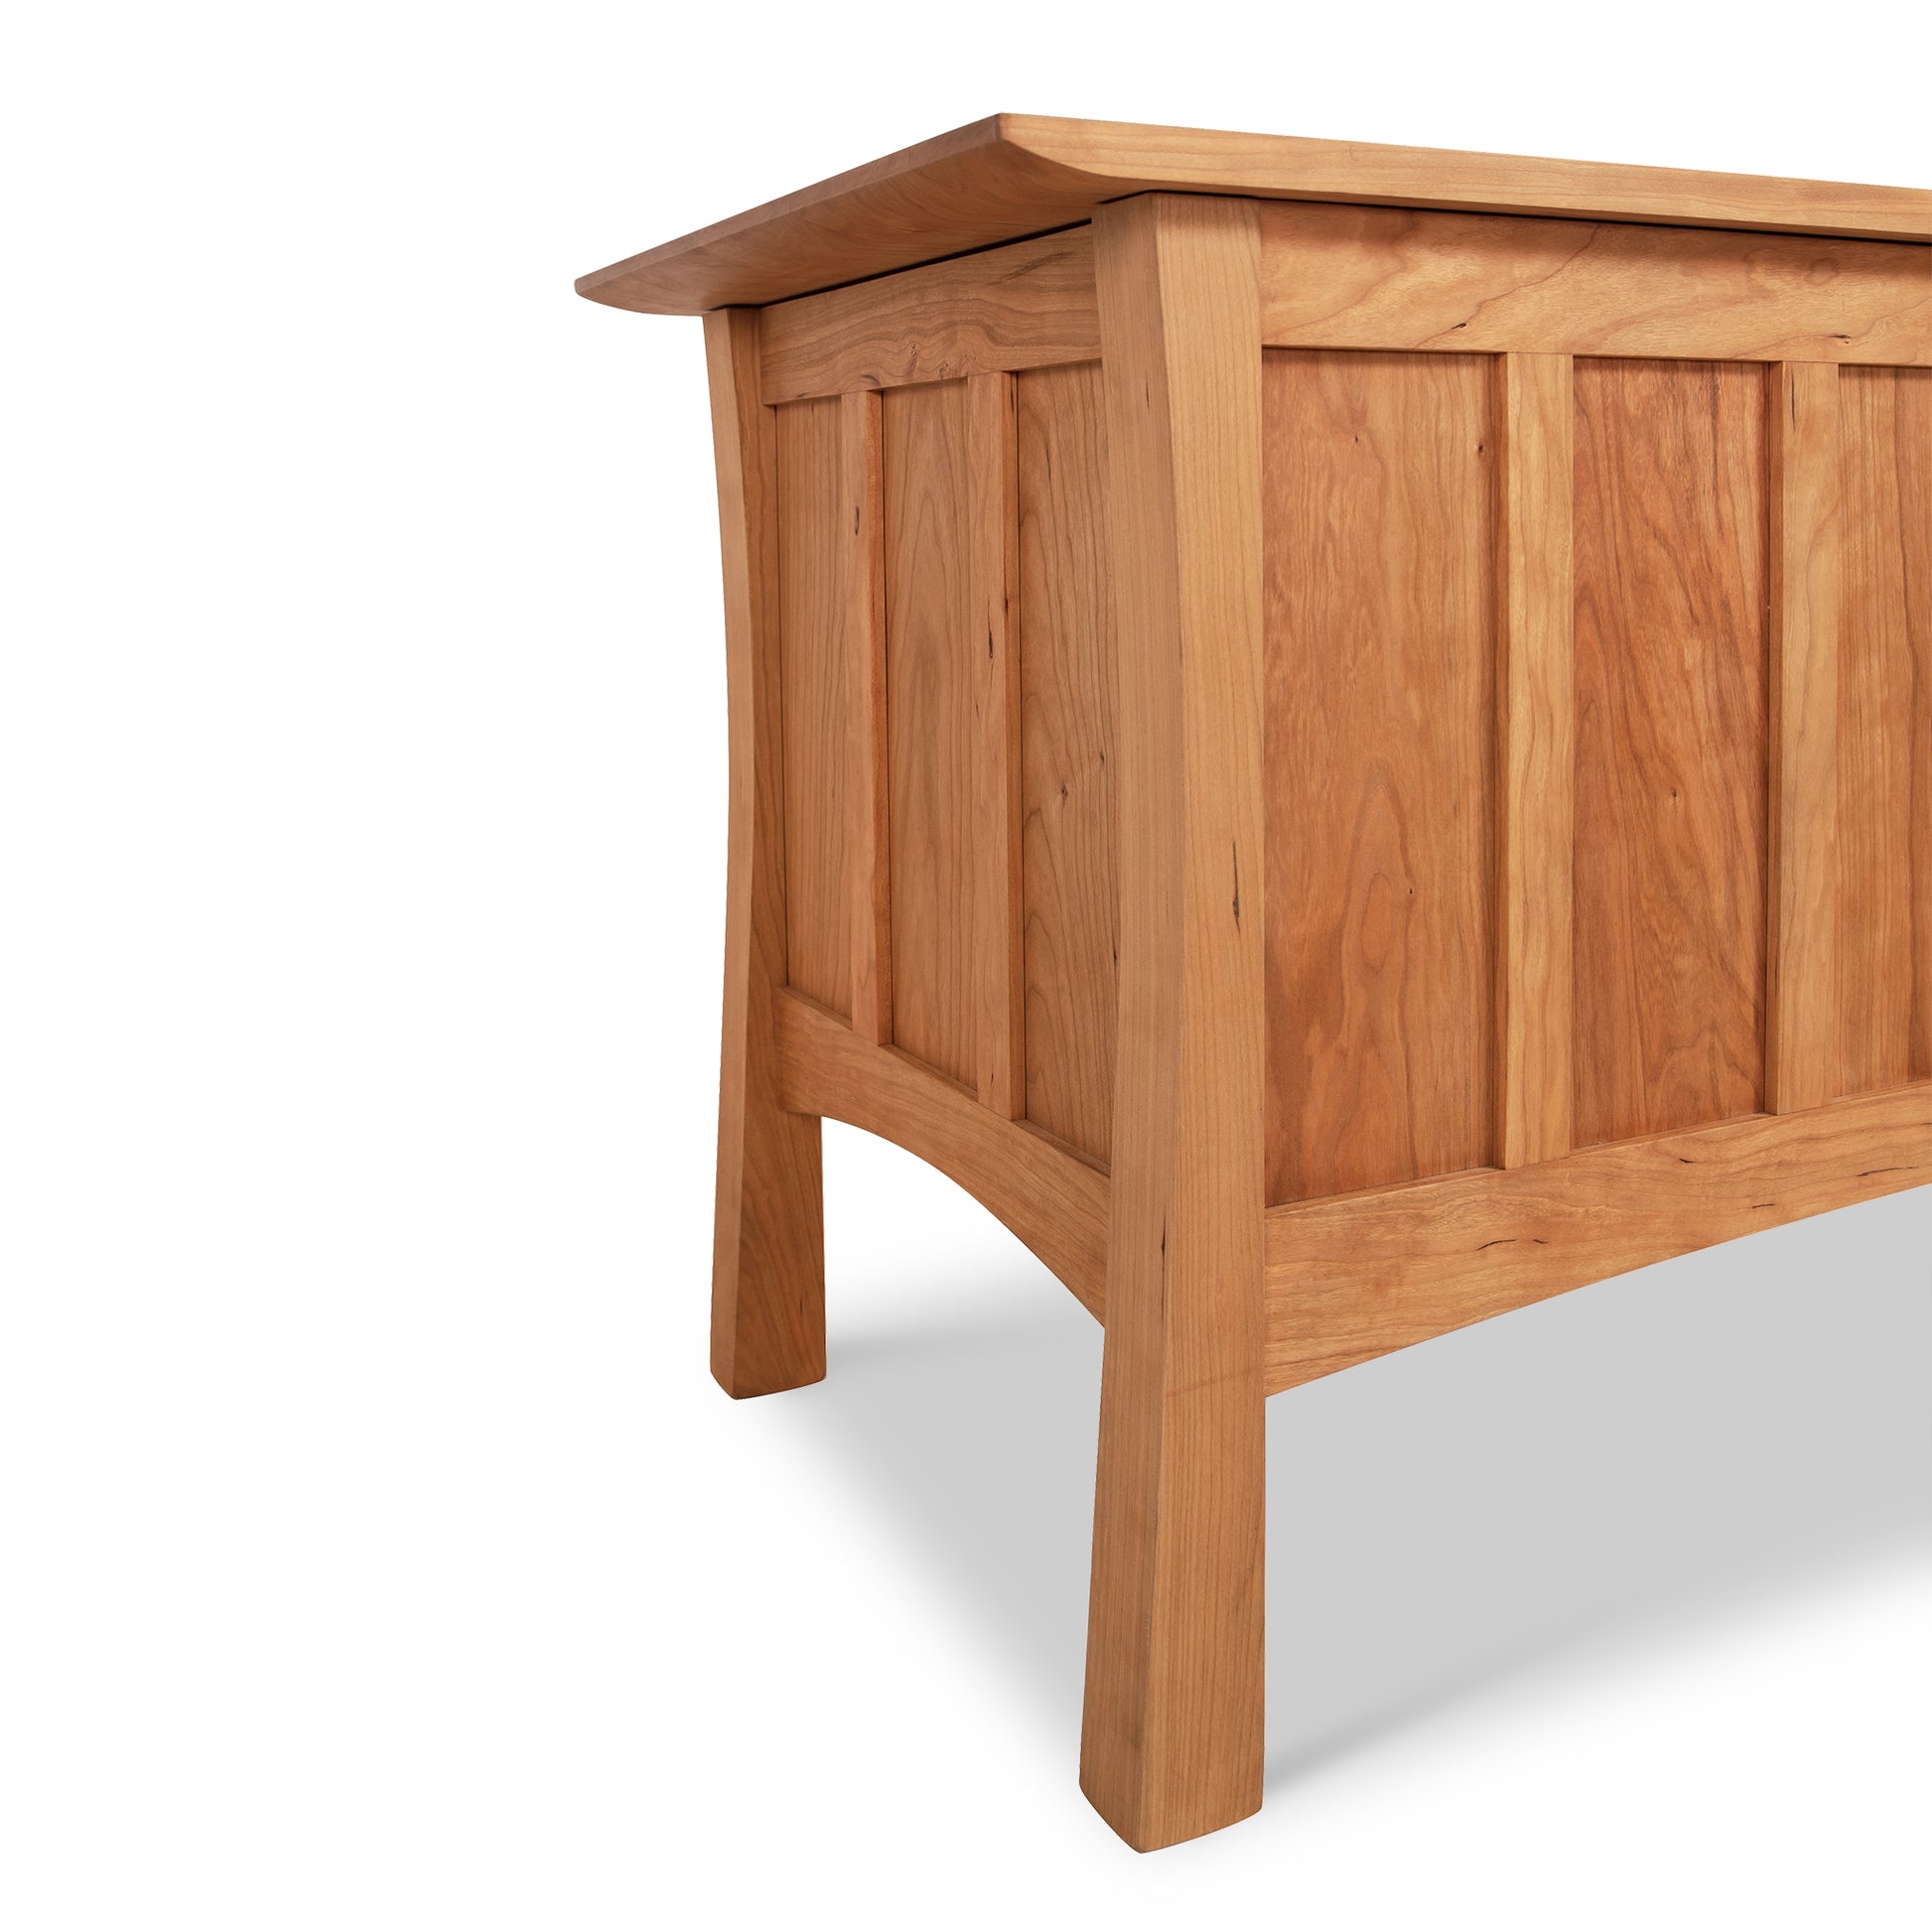 A Vermont Furniture Designs Contemporary Craftsman Blanket Chest with a wooden top.